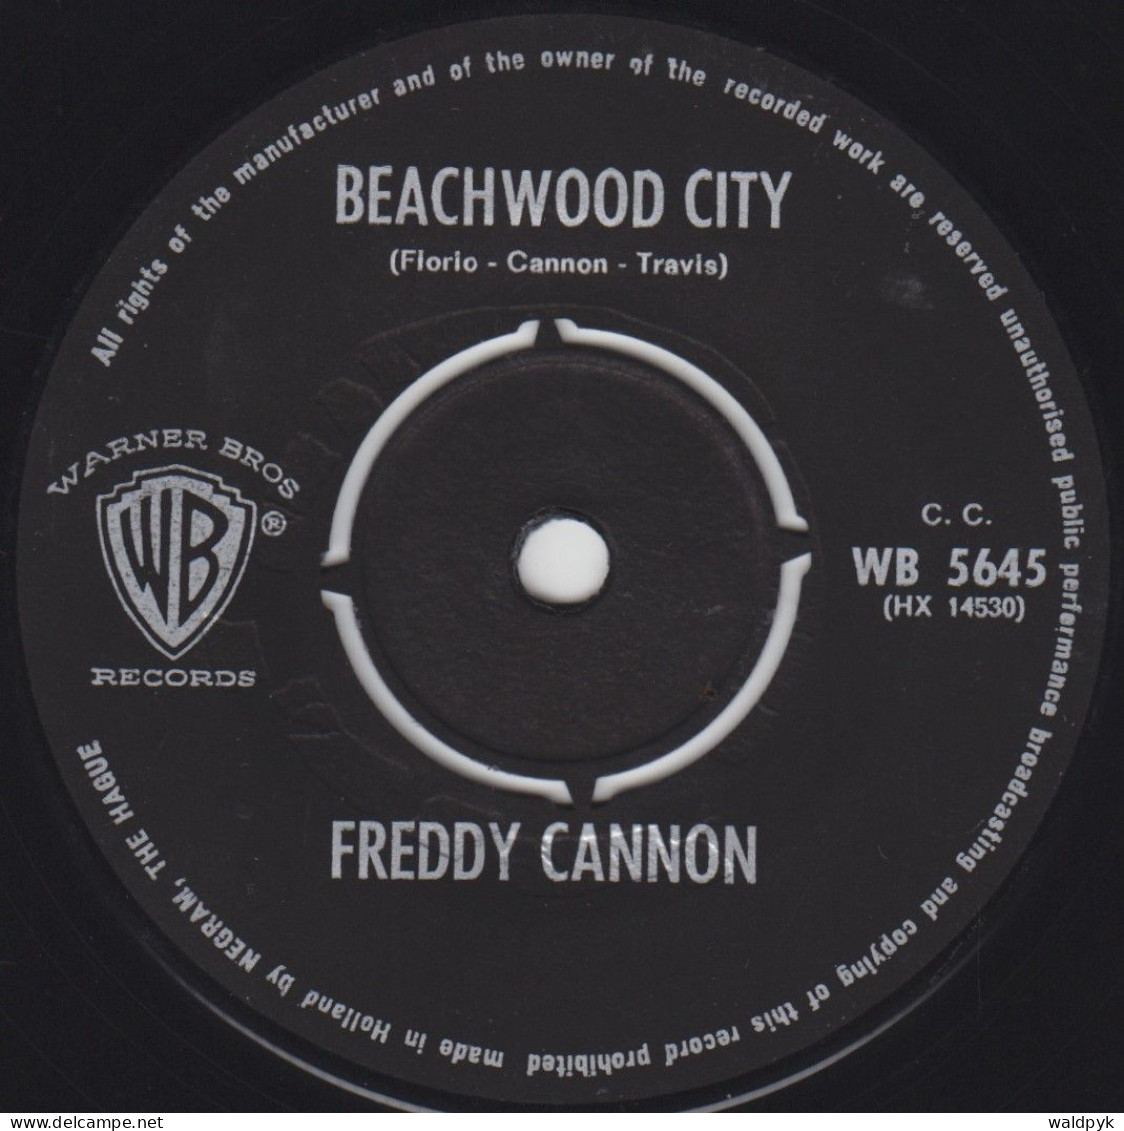 FREDDY CANNON - Action - Andere - Engelstalig